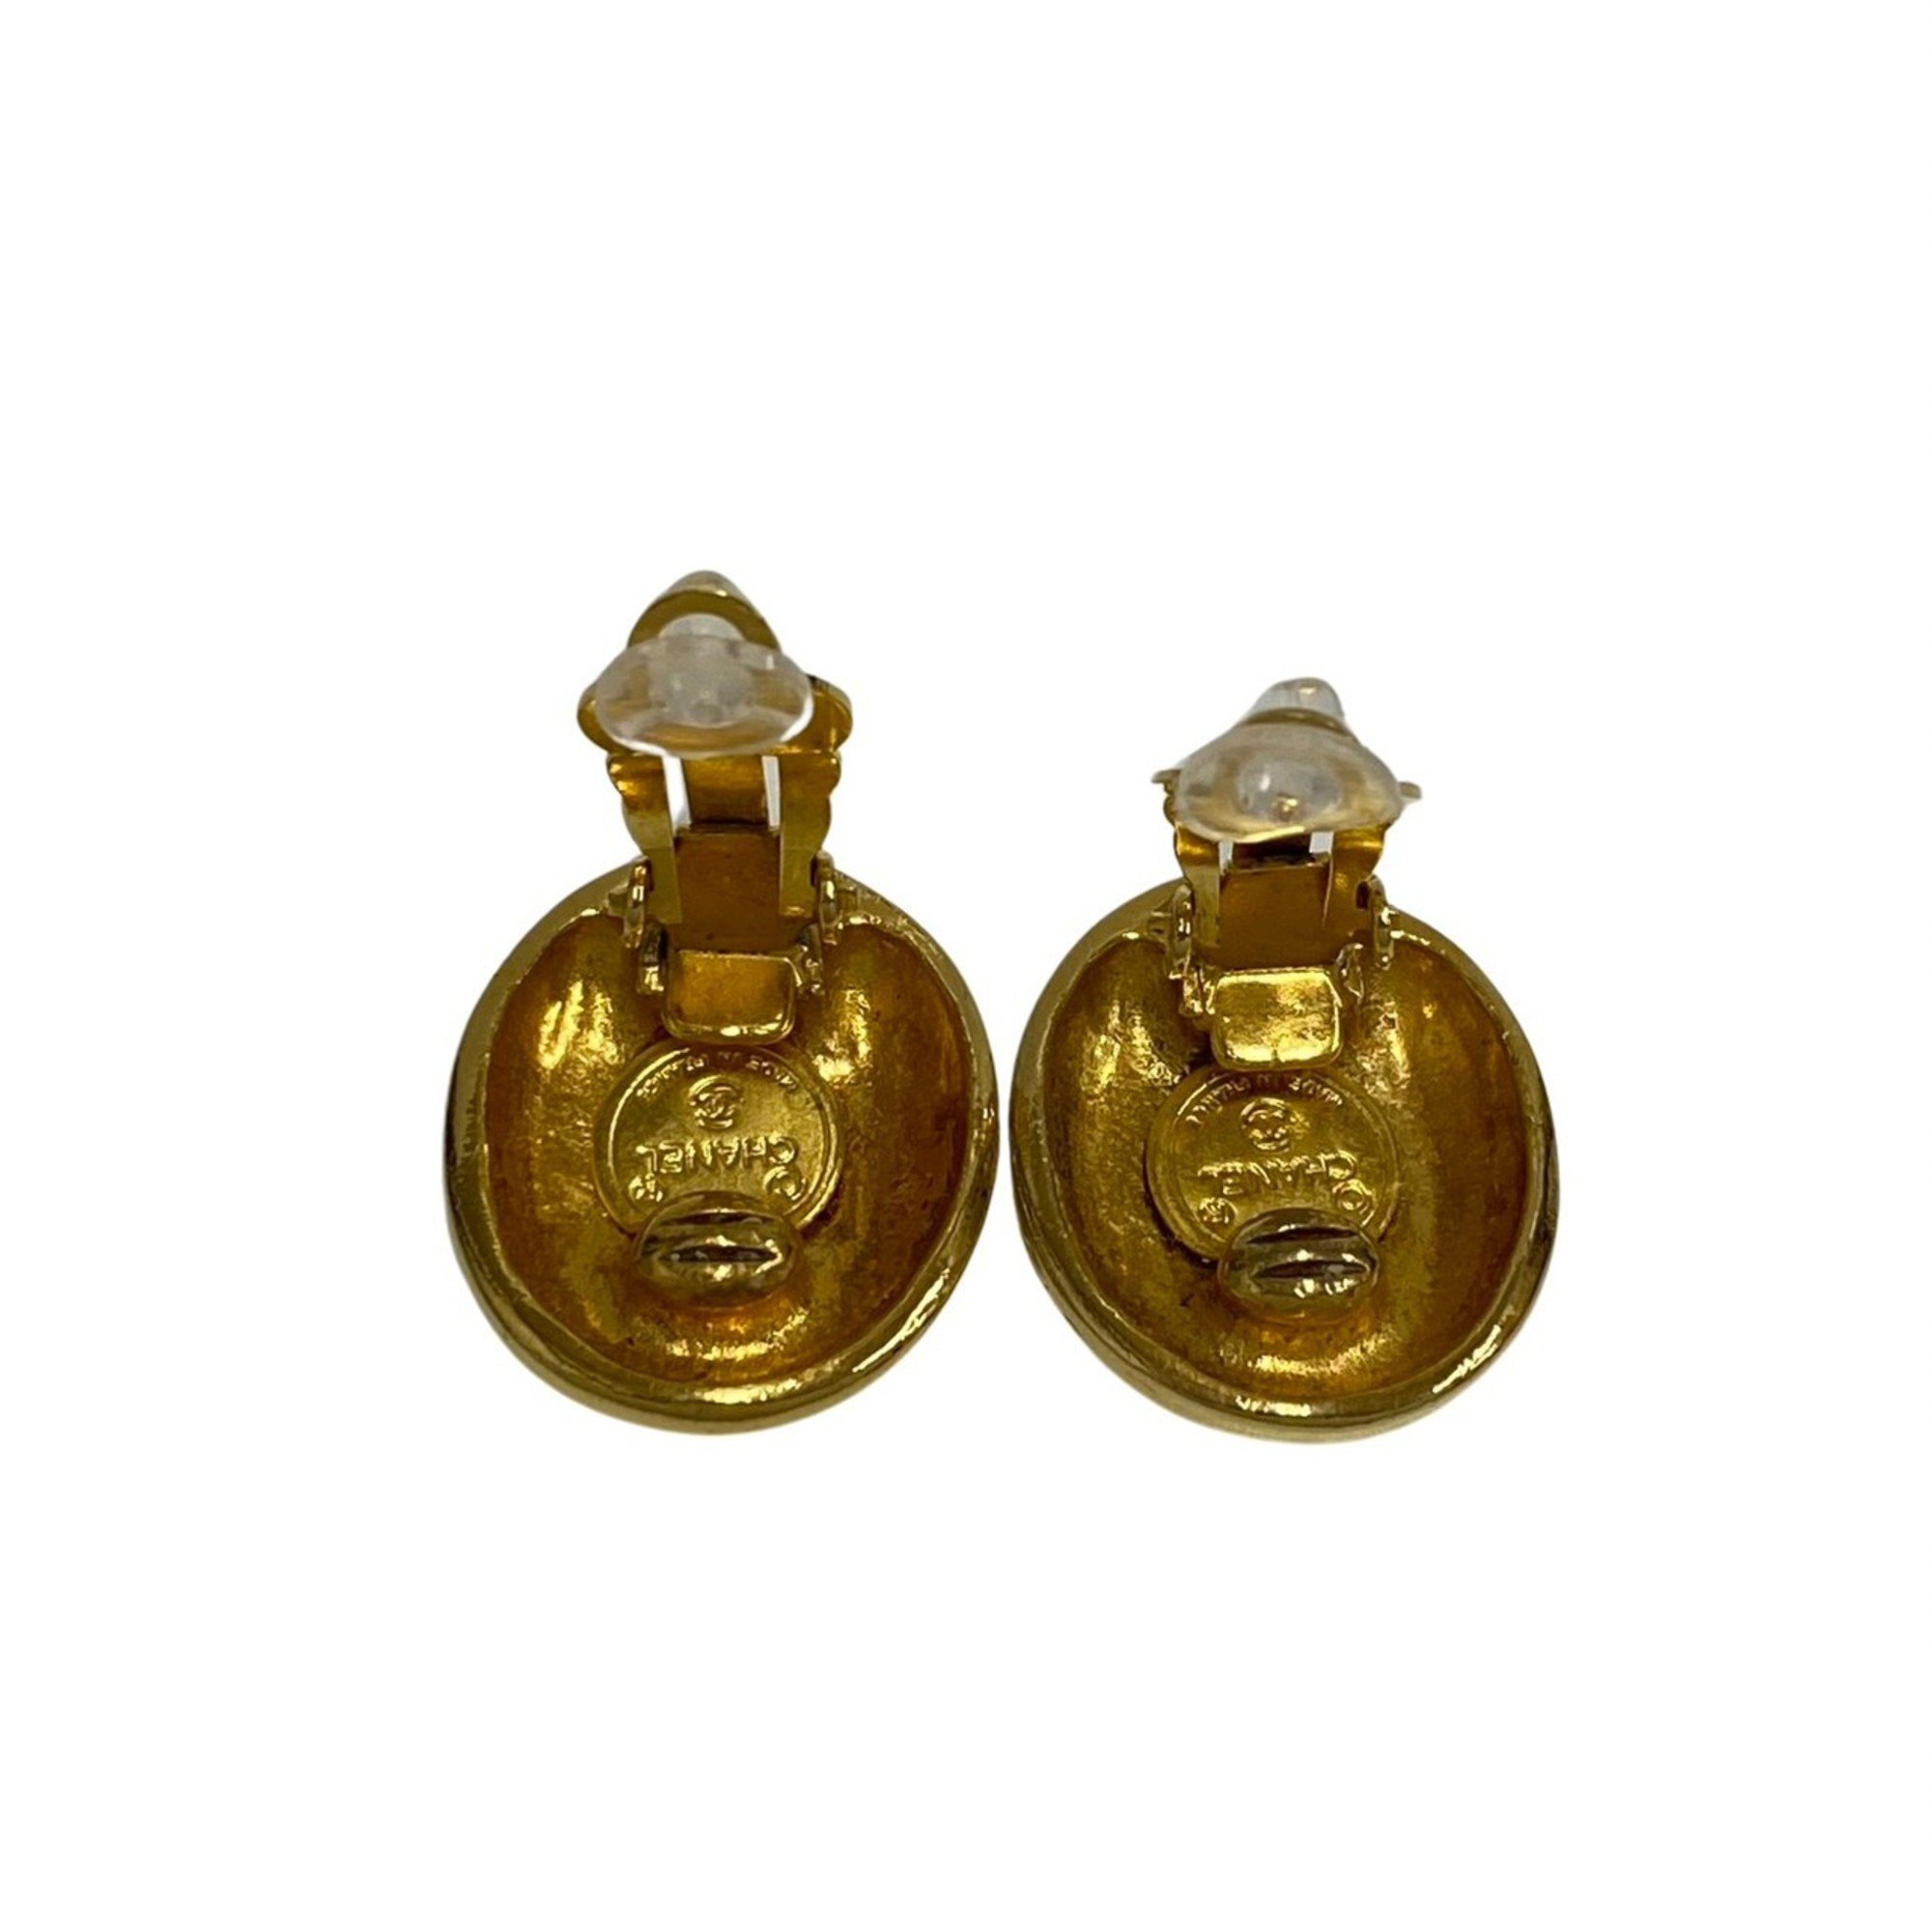 CHANEL Vintage Mademoiselle Motif Icon Earrings Accessories Gold